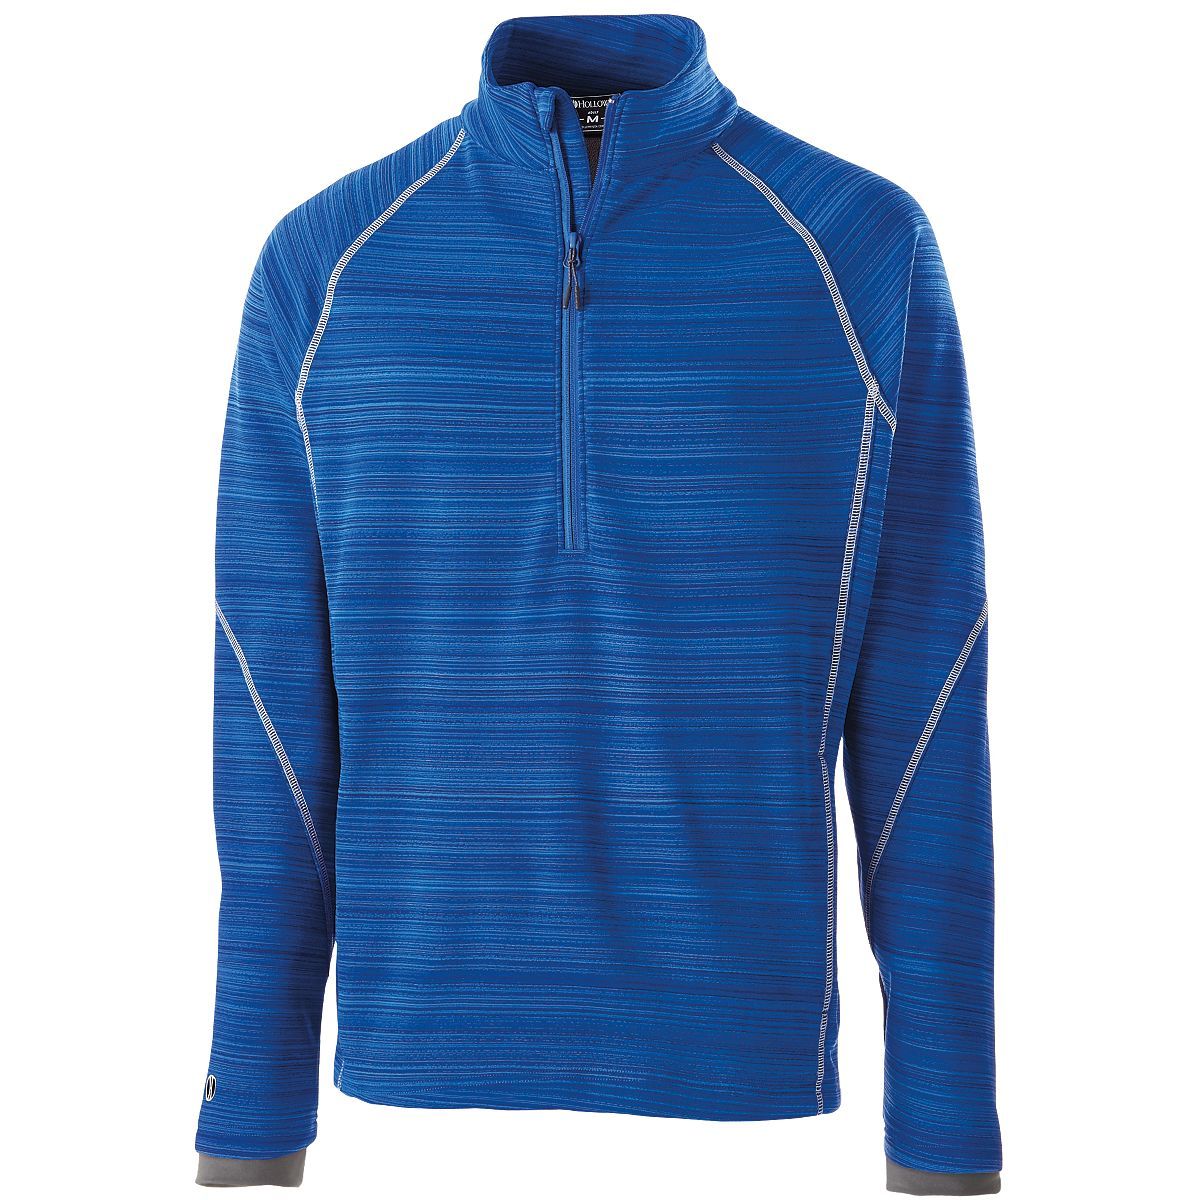 Holloway Deviate Pullover in Royal  -Part of the Adult, Adult-Pullover, Holloway, Outerwear product lines at KanaleyCreations.com